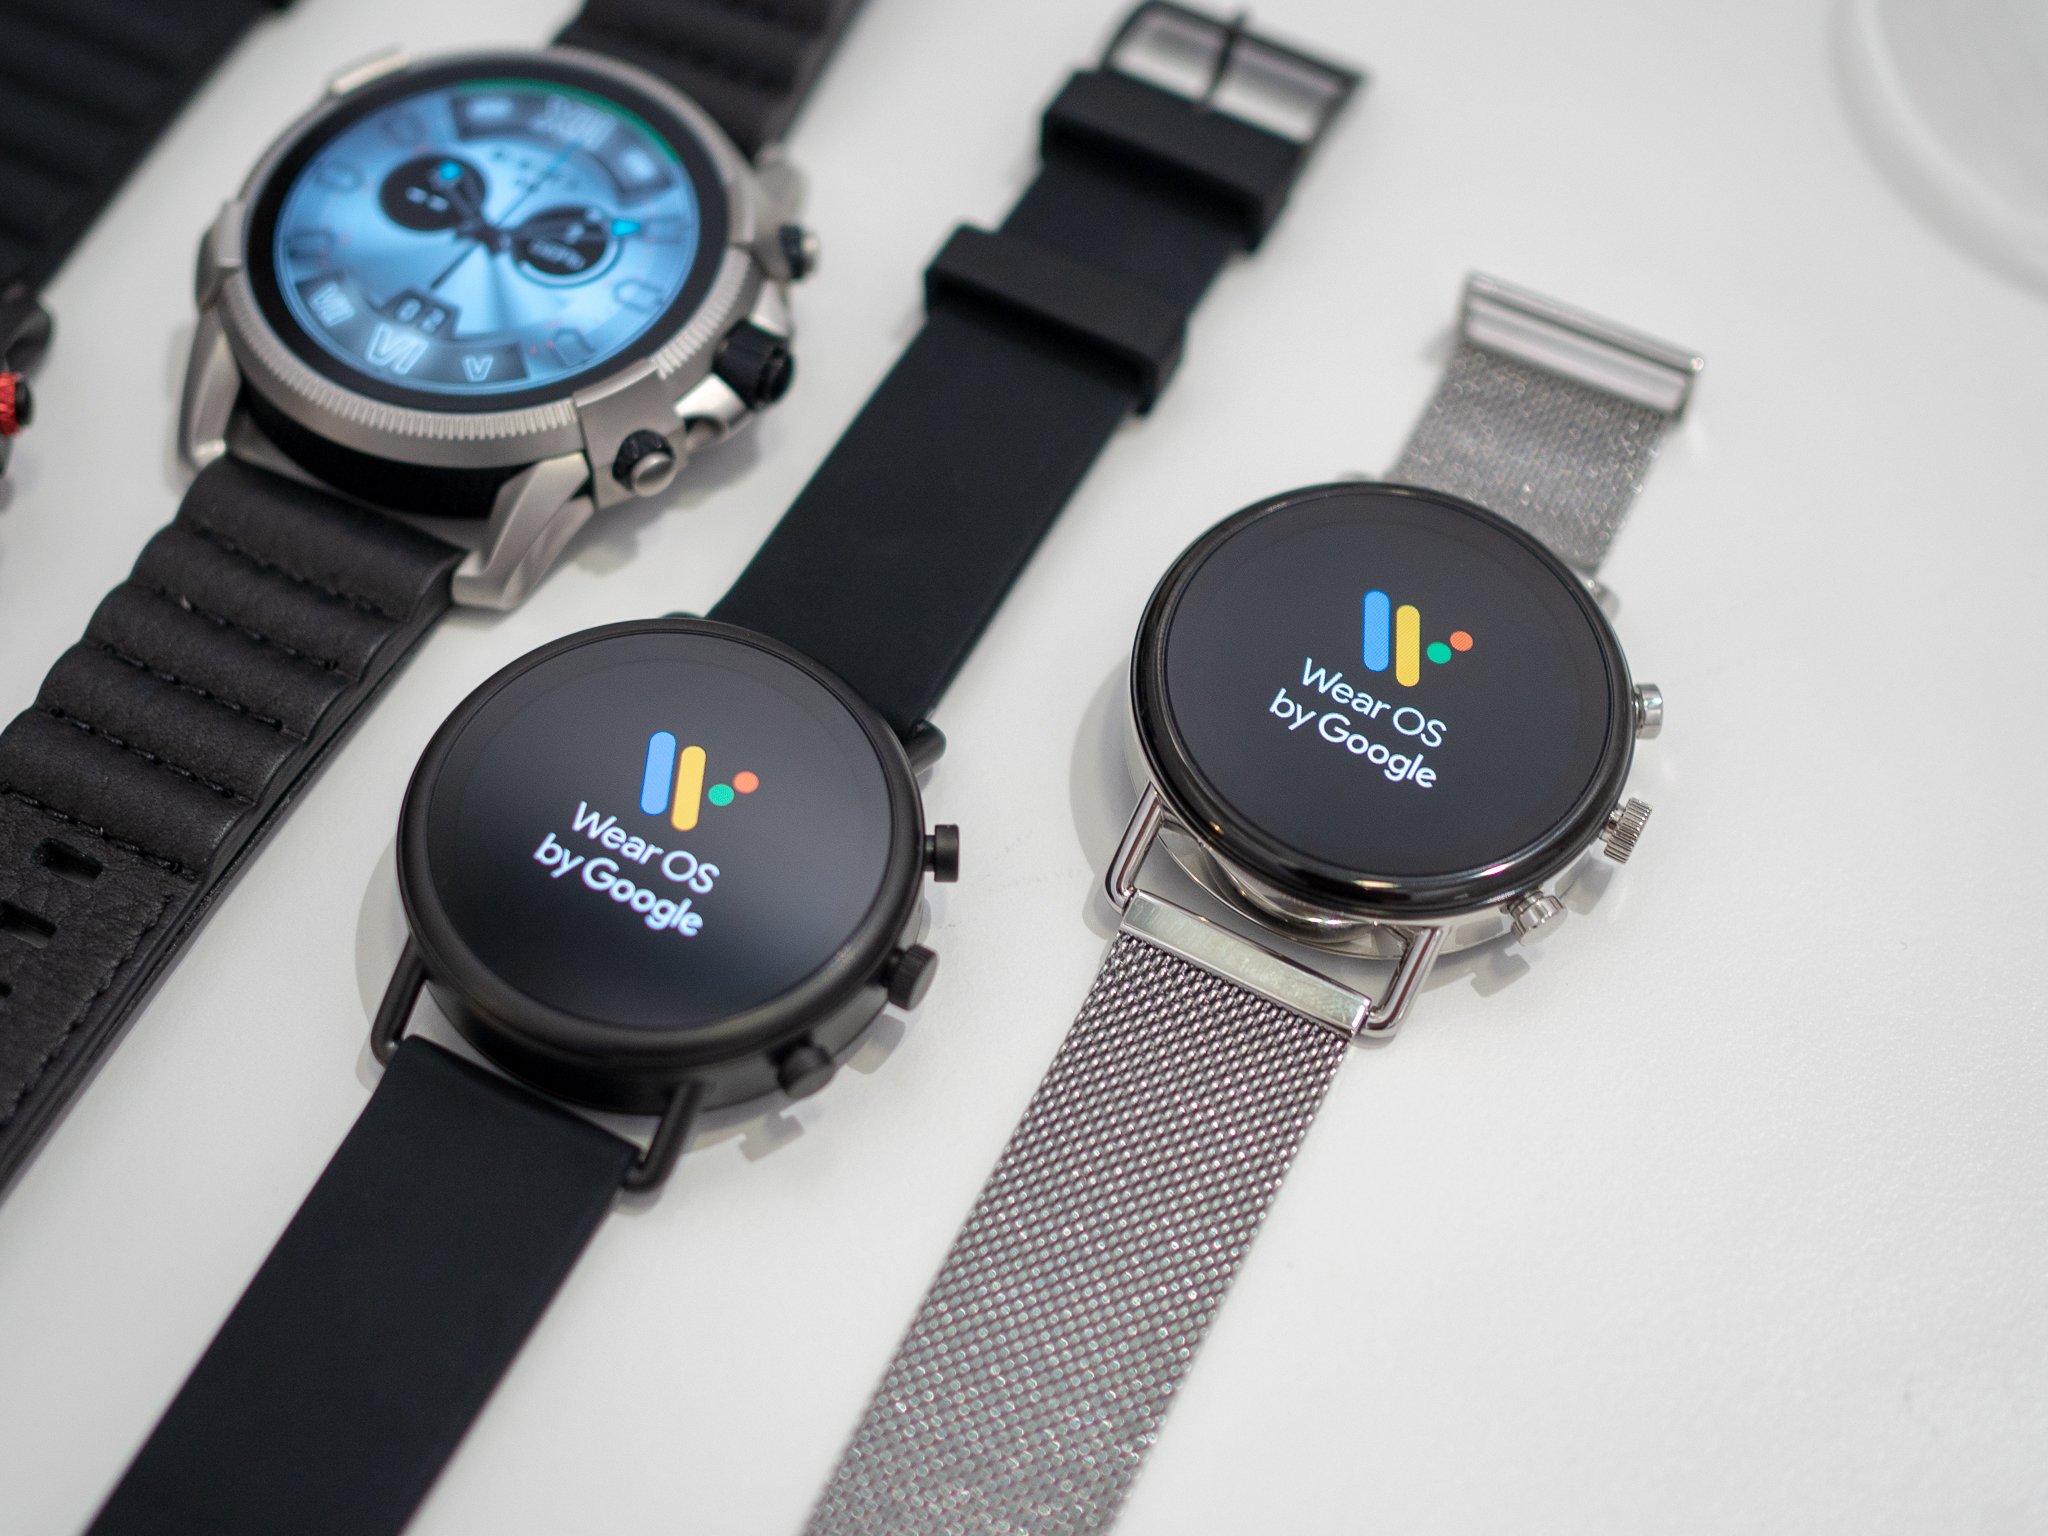 Skagen Falster 2 with Wear OS logo on the display